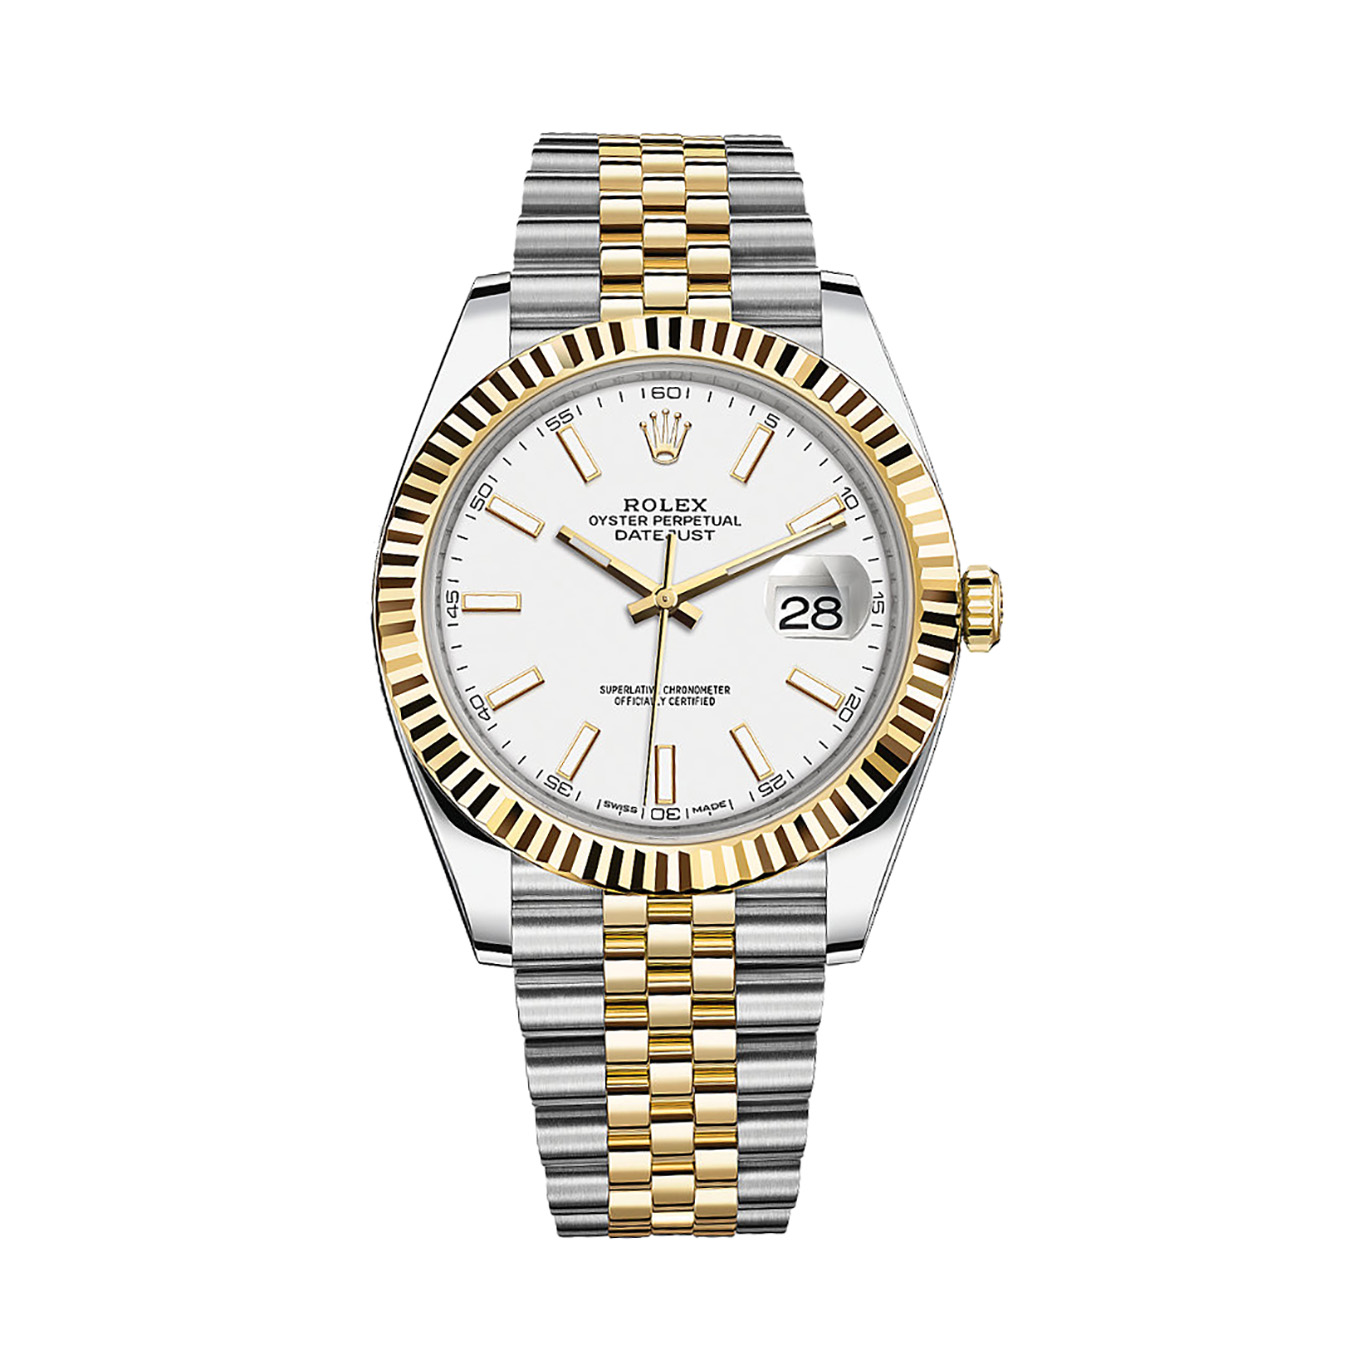 Datejust 41 126333 Gold & Stainless Steel Watch (White)